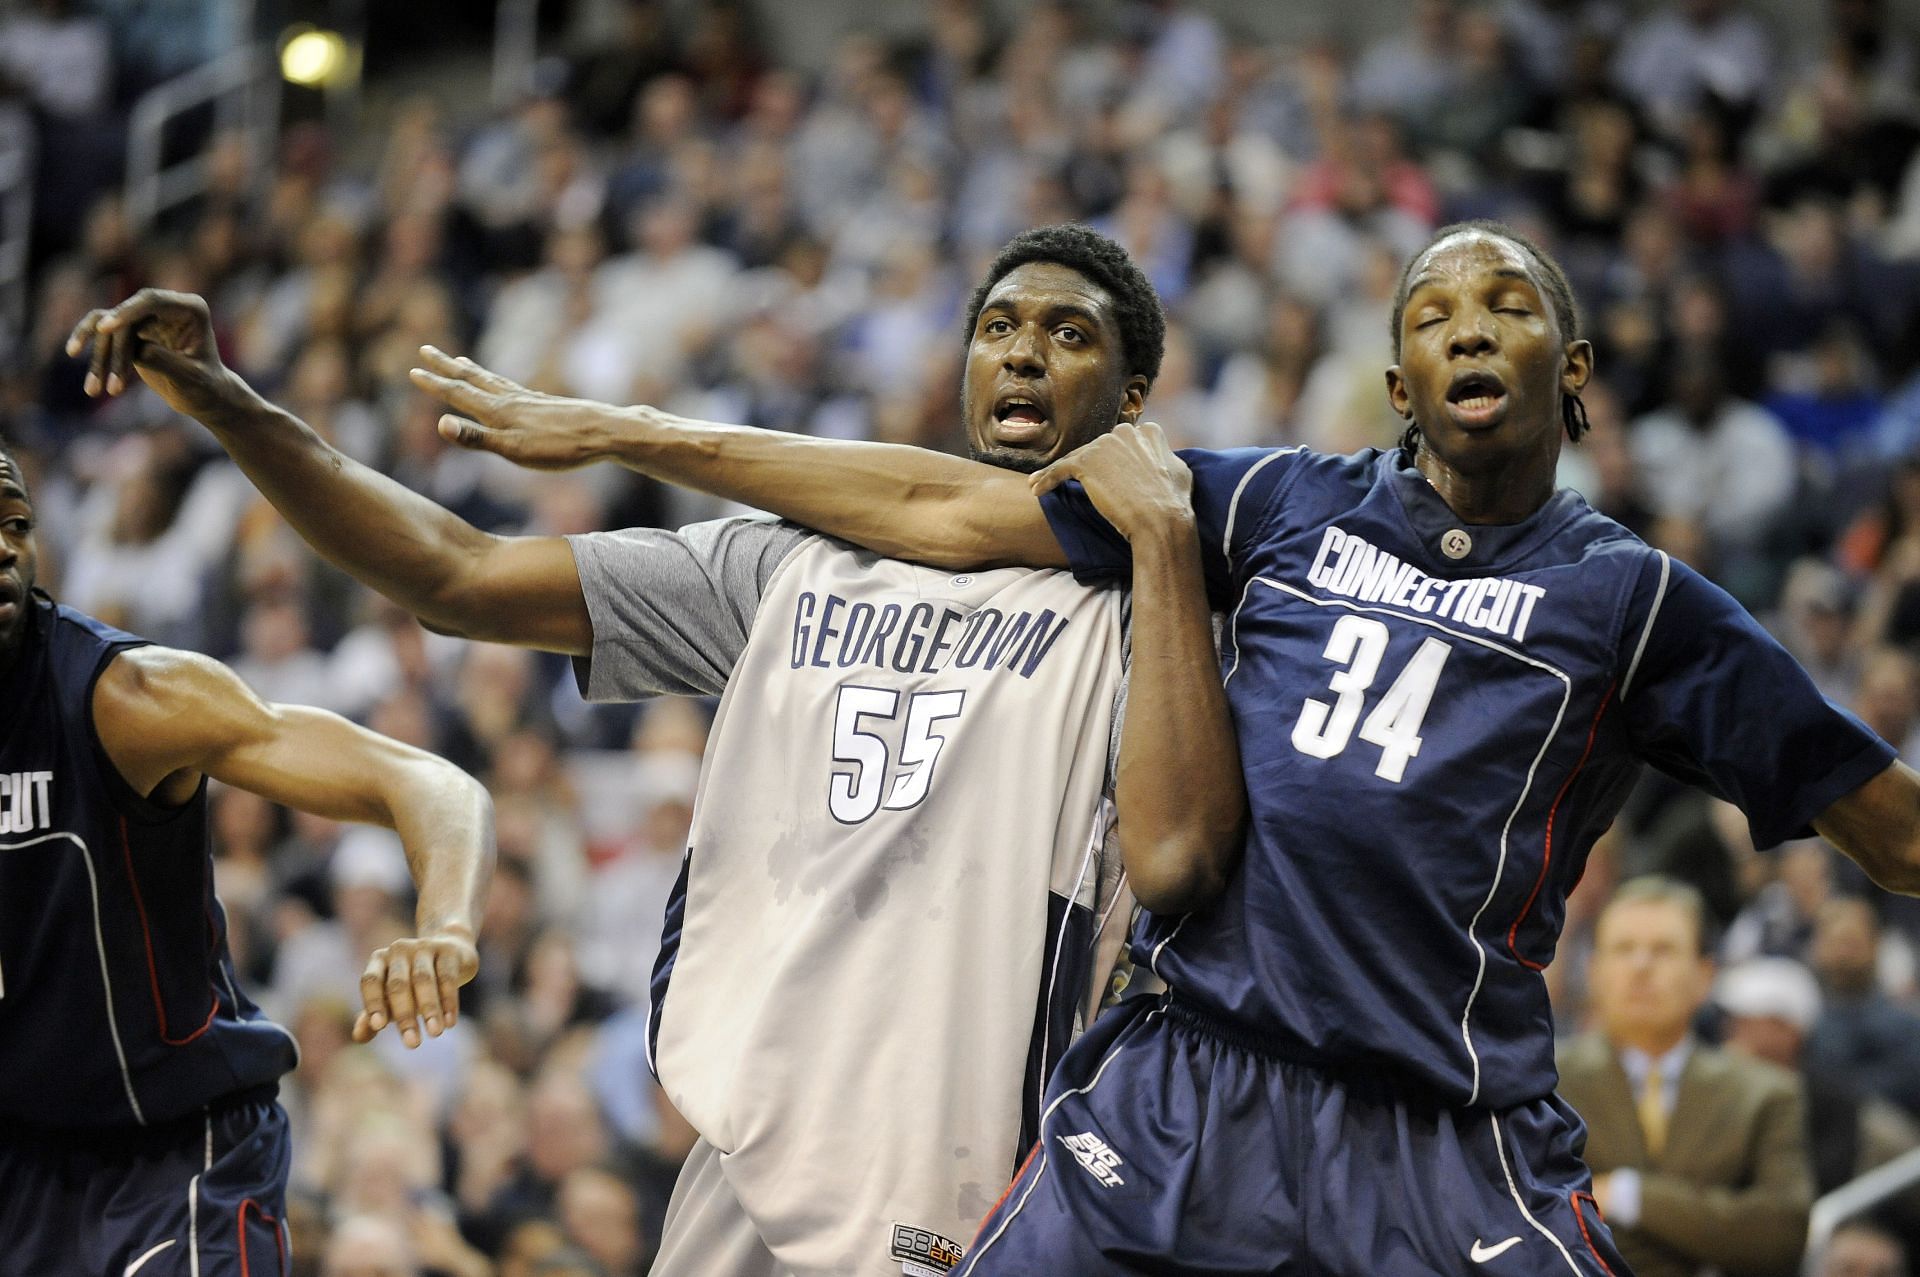 UConn center Hasheem Thabeet was a defensive star in college. After going second in the 2009 NBA Draft, he was a non-factor in the NBA.